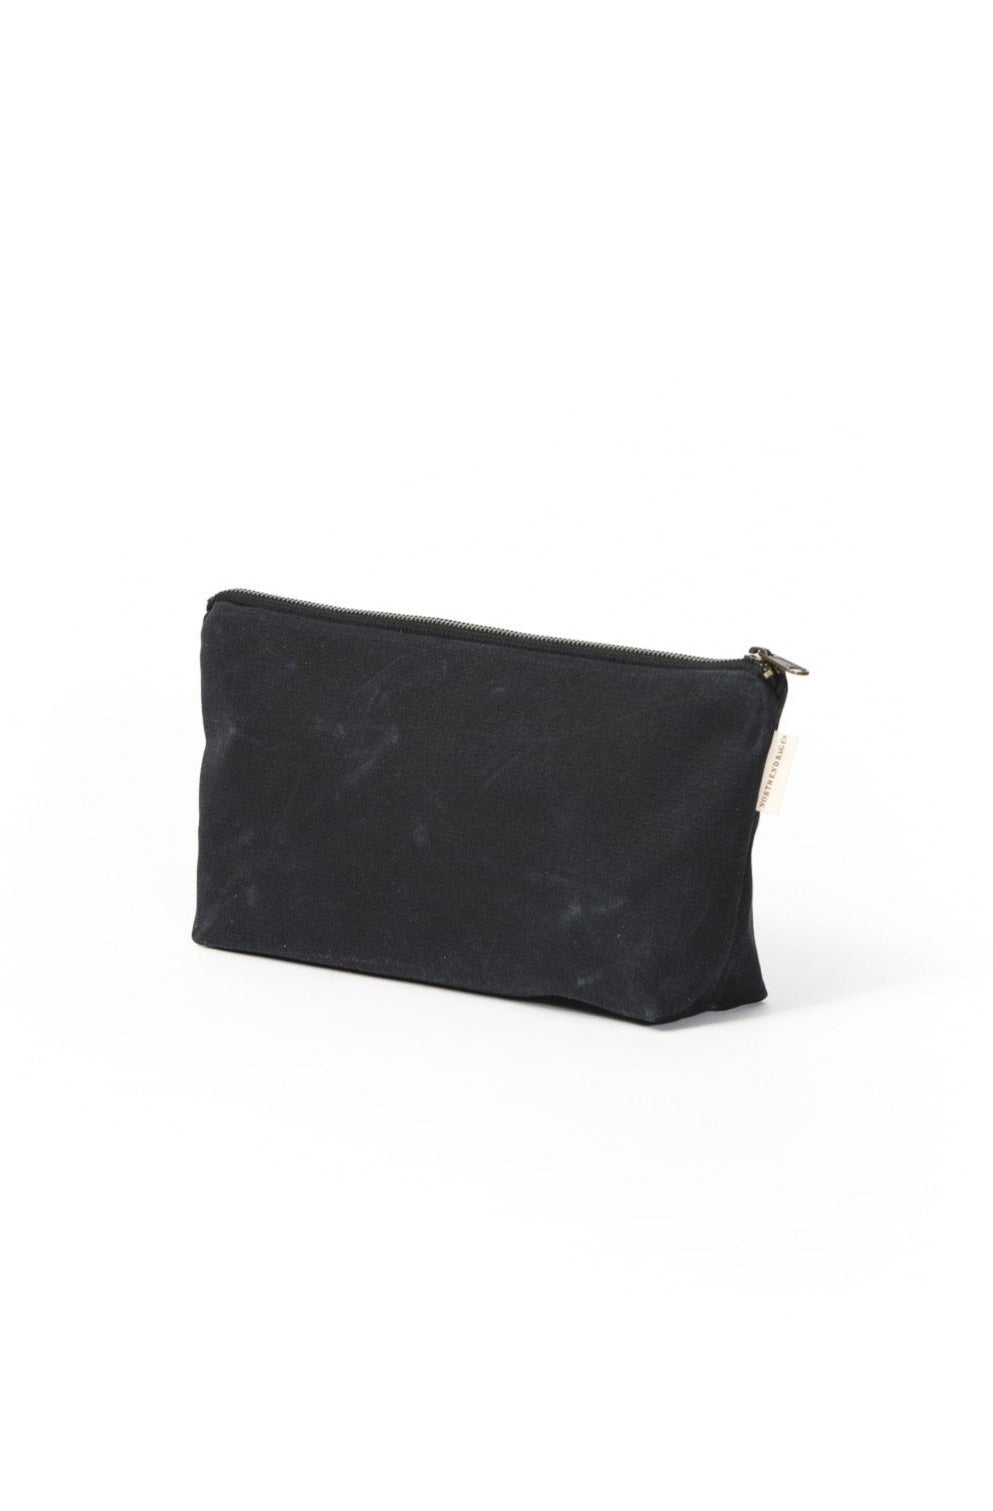 Create Your Own Leather Clutch Bag Kit By Love and Salvage |  notonthehighstreet.com